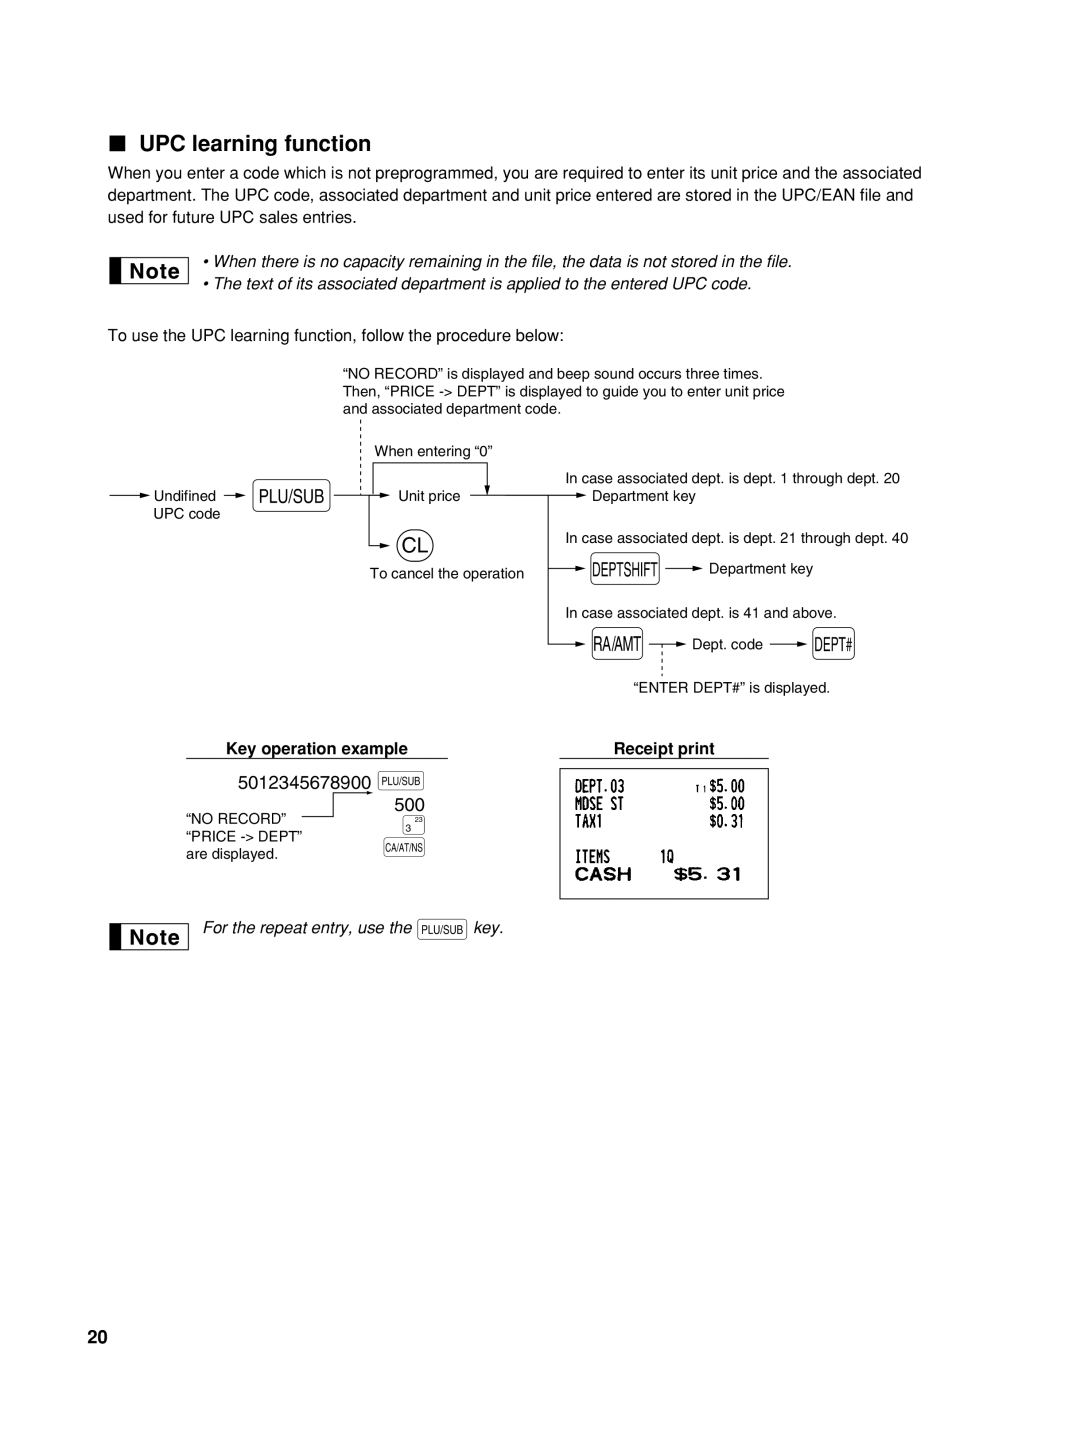 Sharp XE-A42S instruction manual UPC learning function, Key operation example, Receipt print 